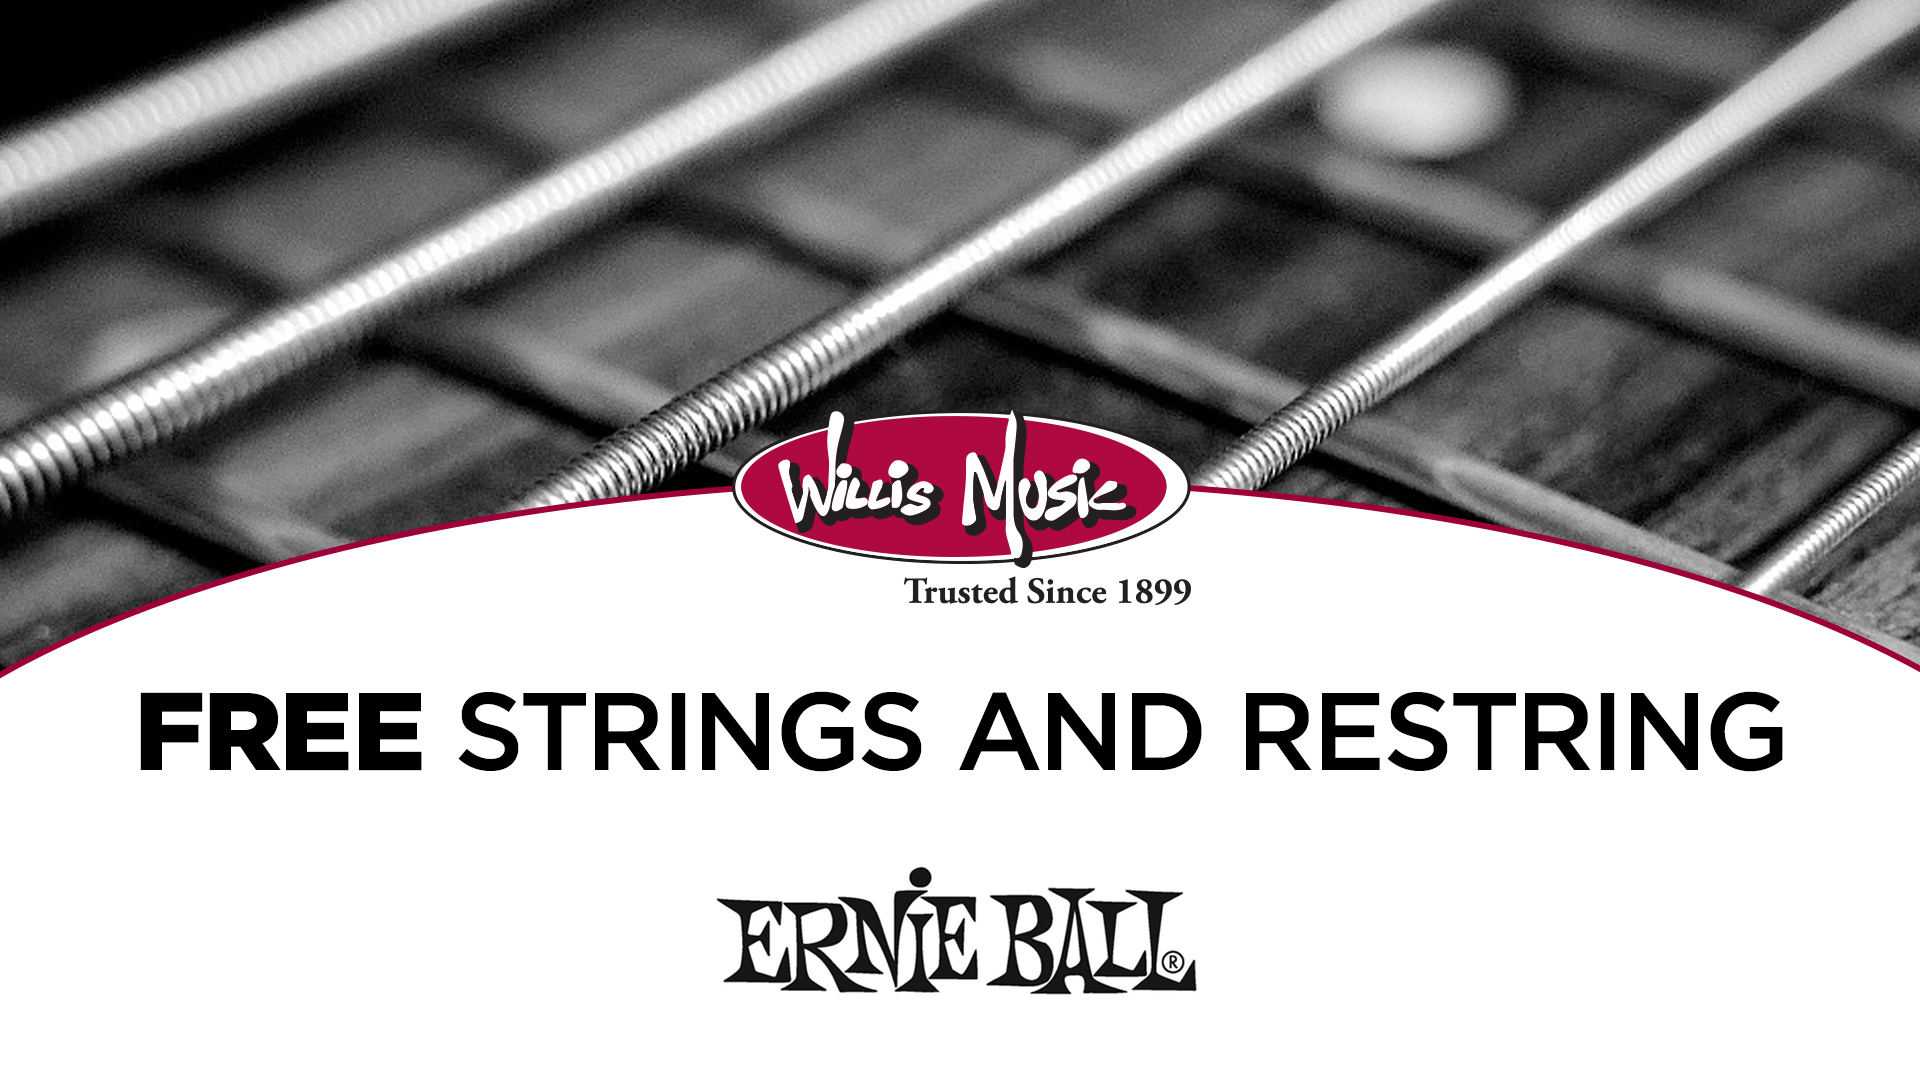 Free Strings and restring Event Ernie Ball